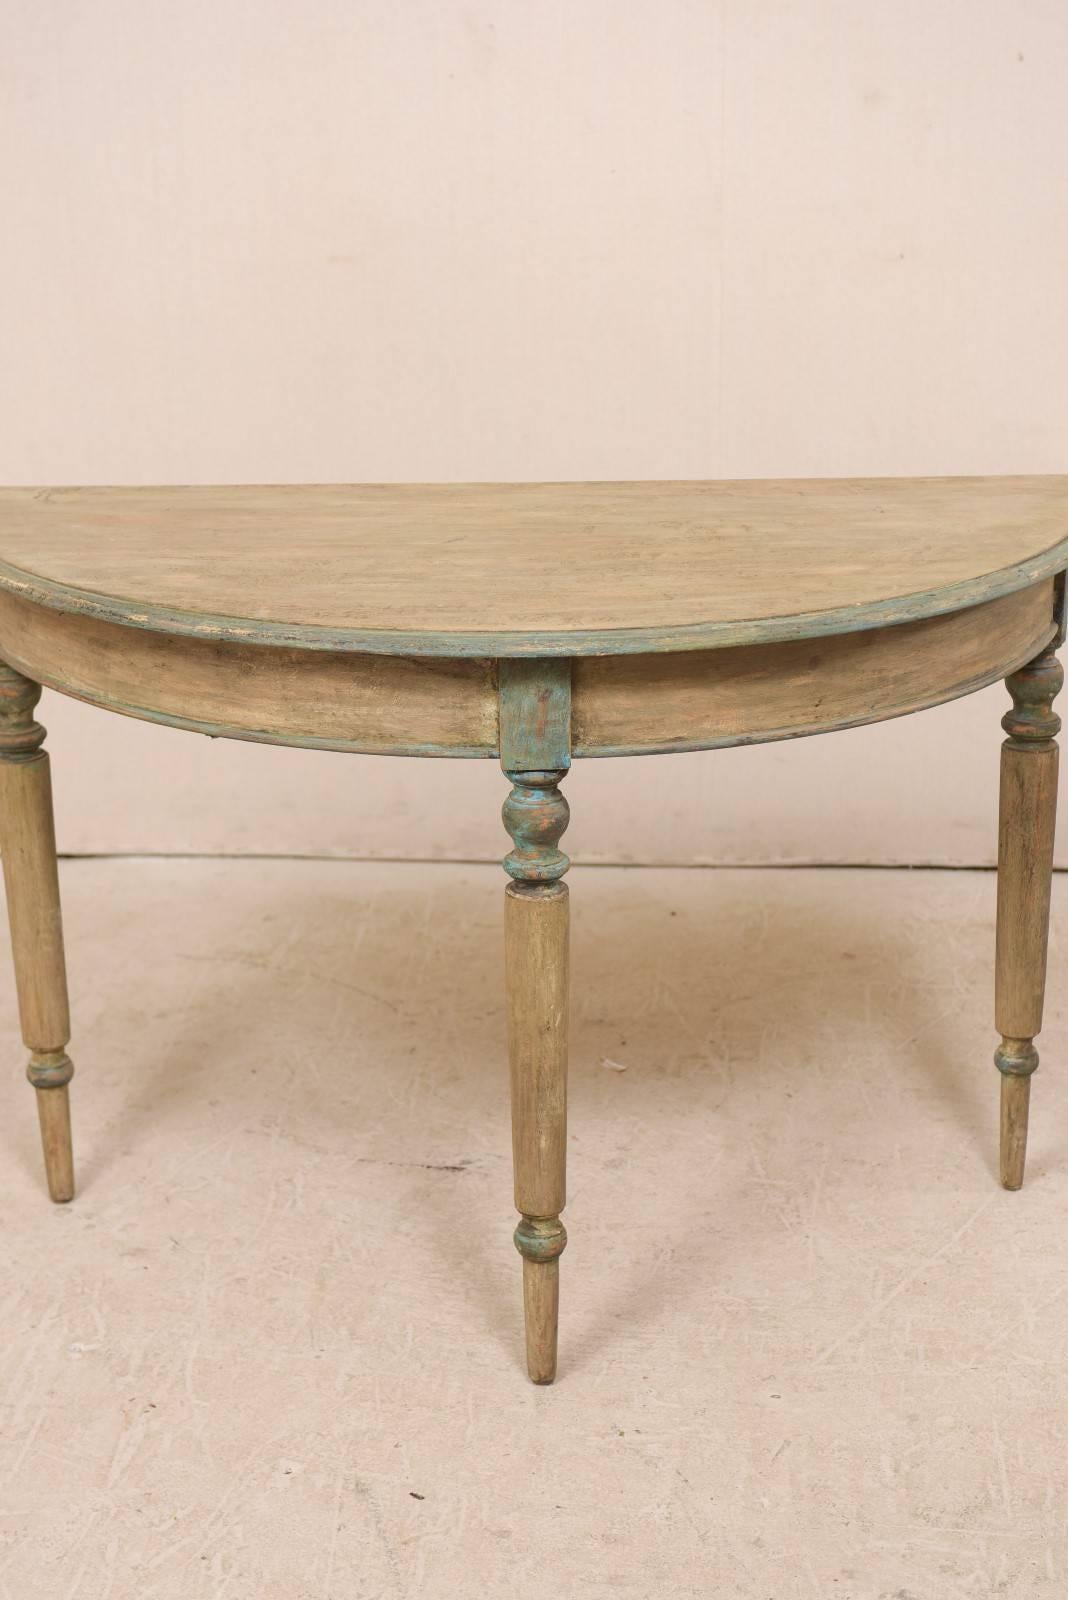 A pair of 19th century Swedish painted wood demilune tables. This pair of Swedish demi-lune table features a semi-circular top over a rounded shaped apron. These demi-lune tables are each raised upon three beautifully turned legs. The tables are